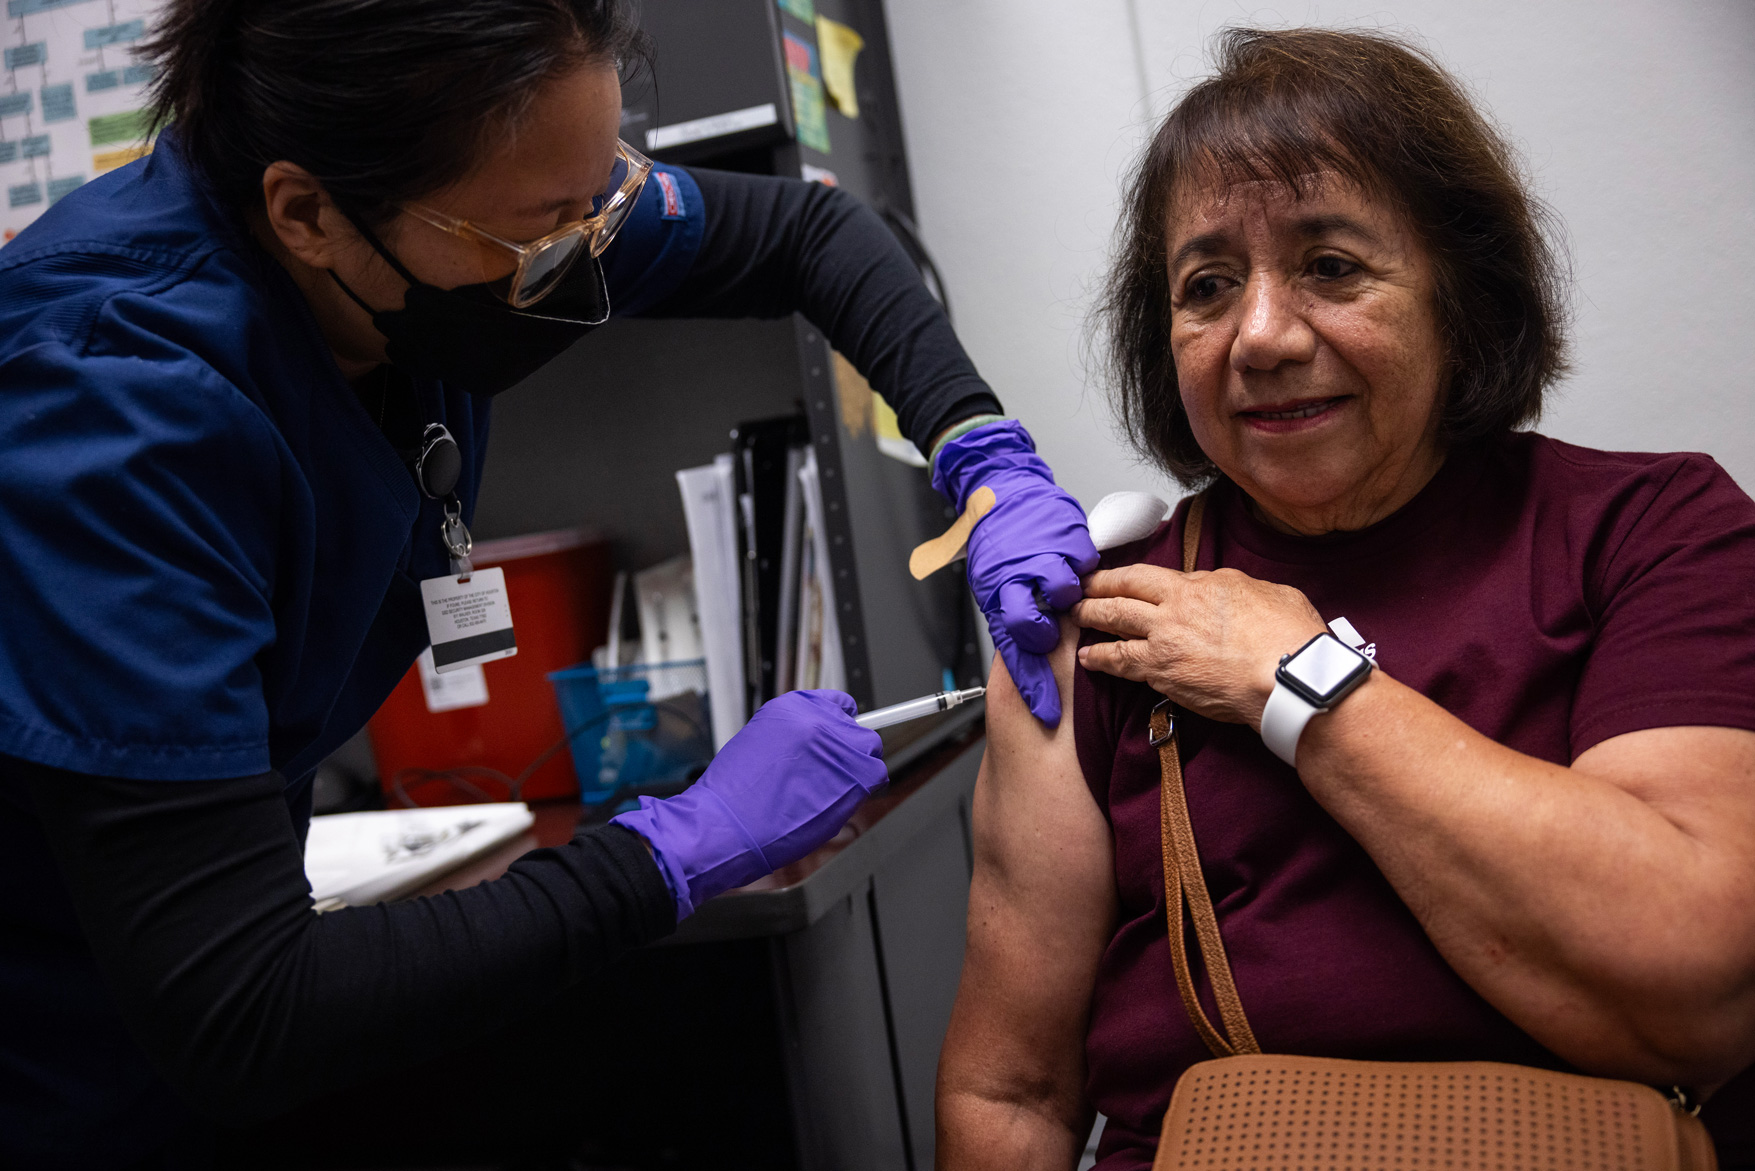 Mary Khuat, at left, administered a COVID-19 vaccine shot to Maria Patino, 73, at Northside Health Center